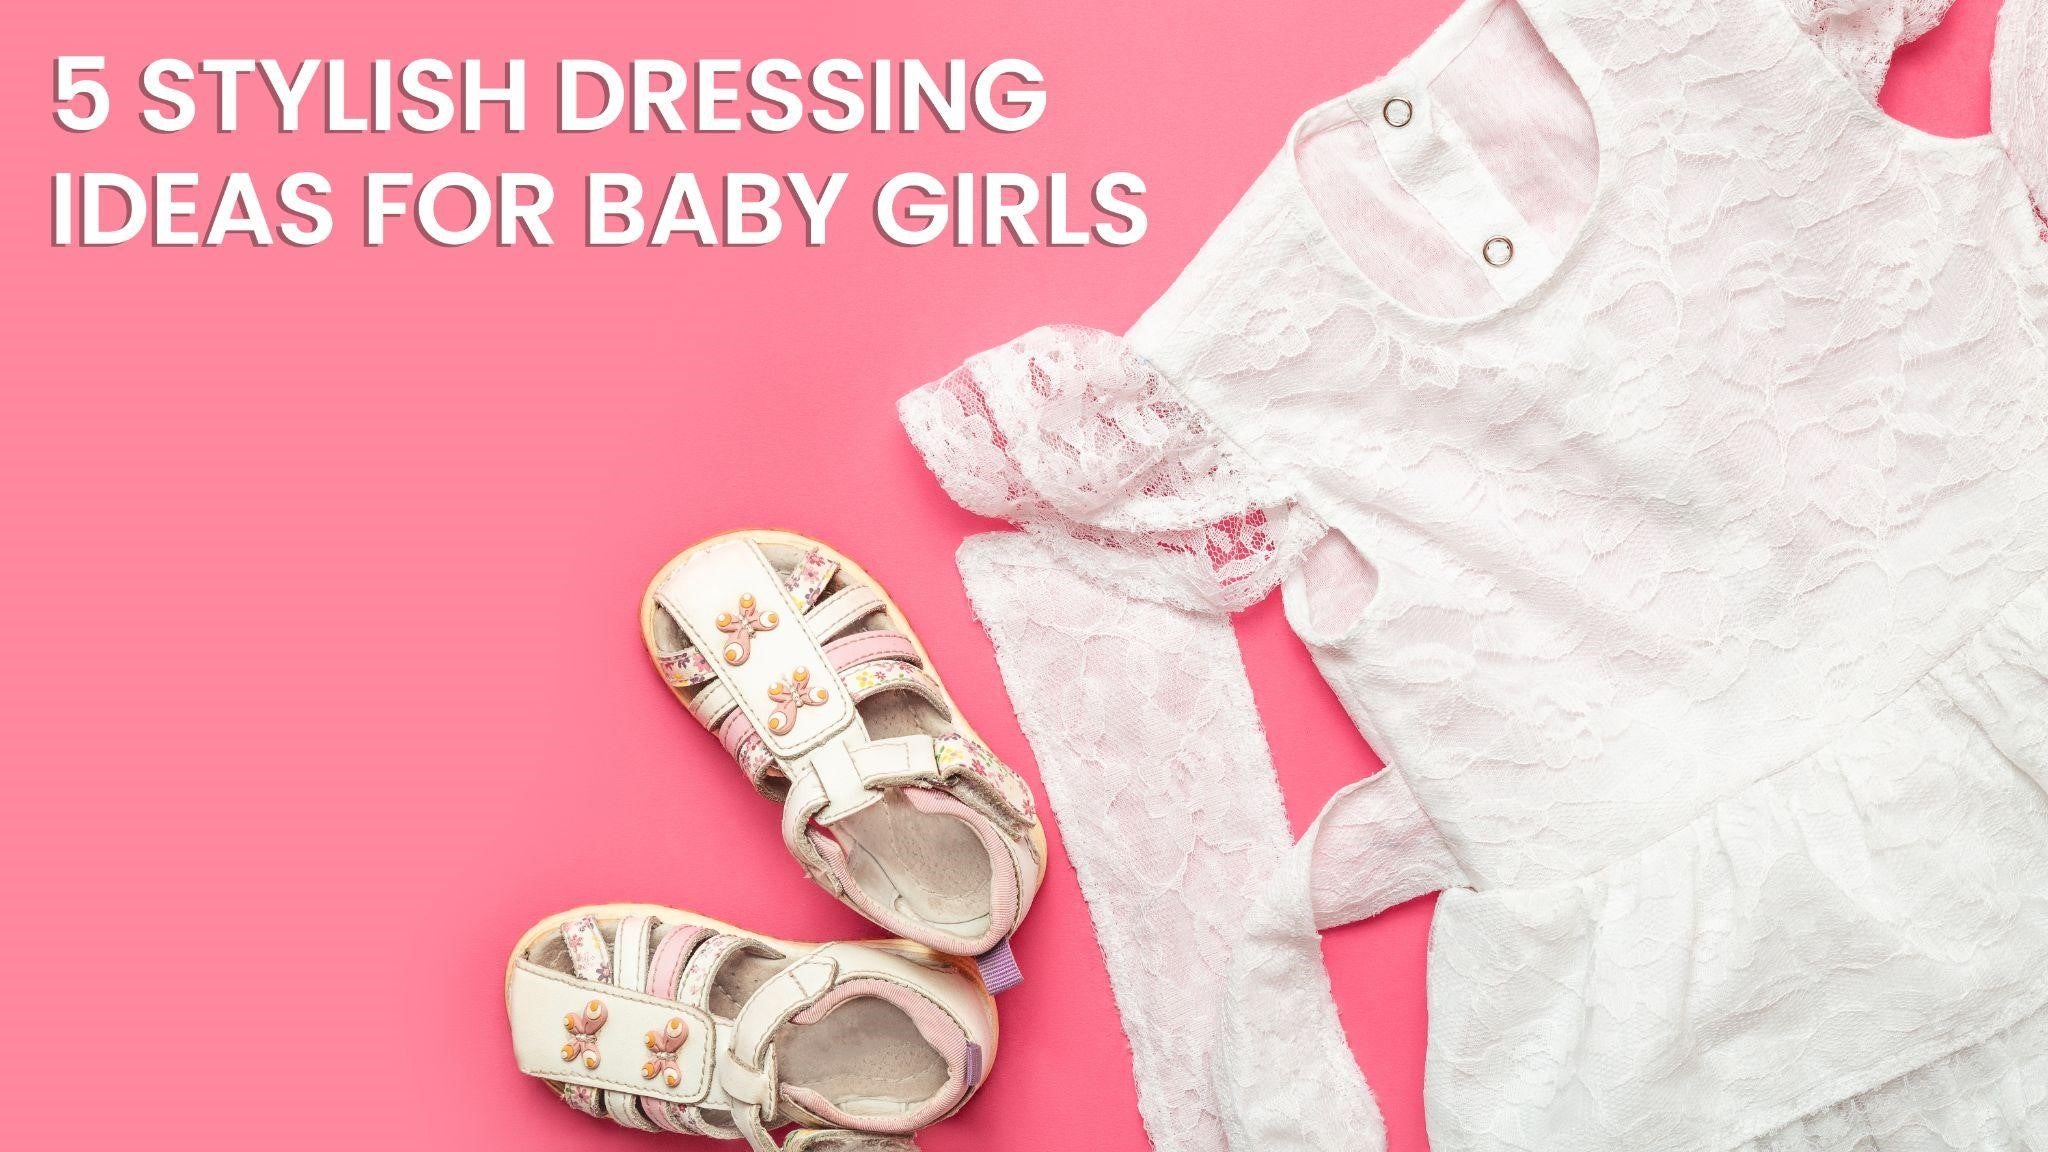 5 Stylish Dressing Ideas for Your Baby Girl